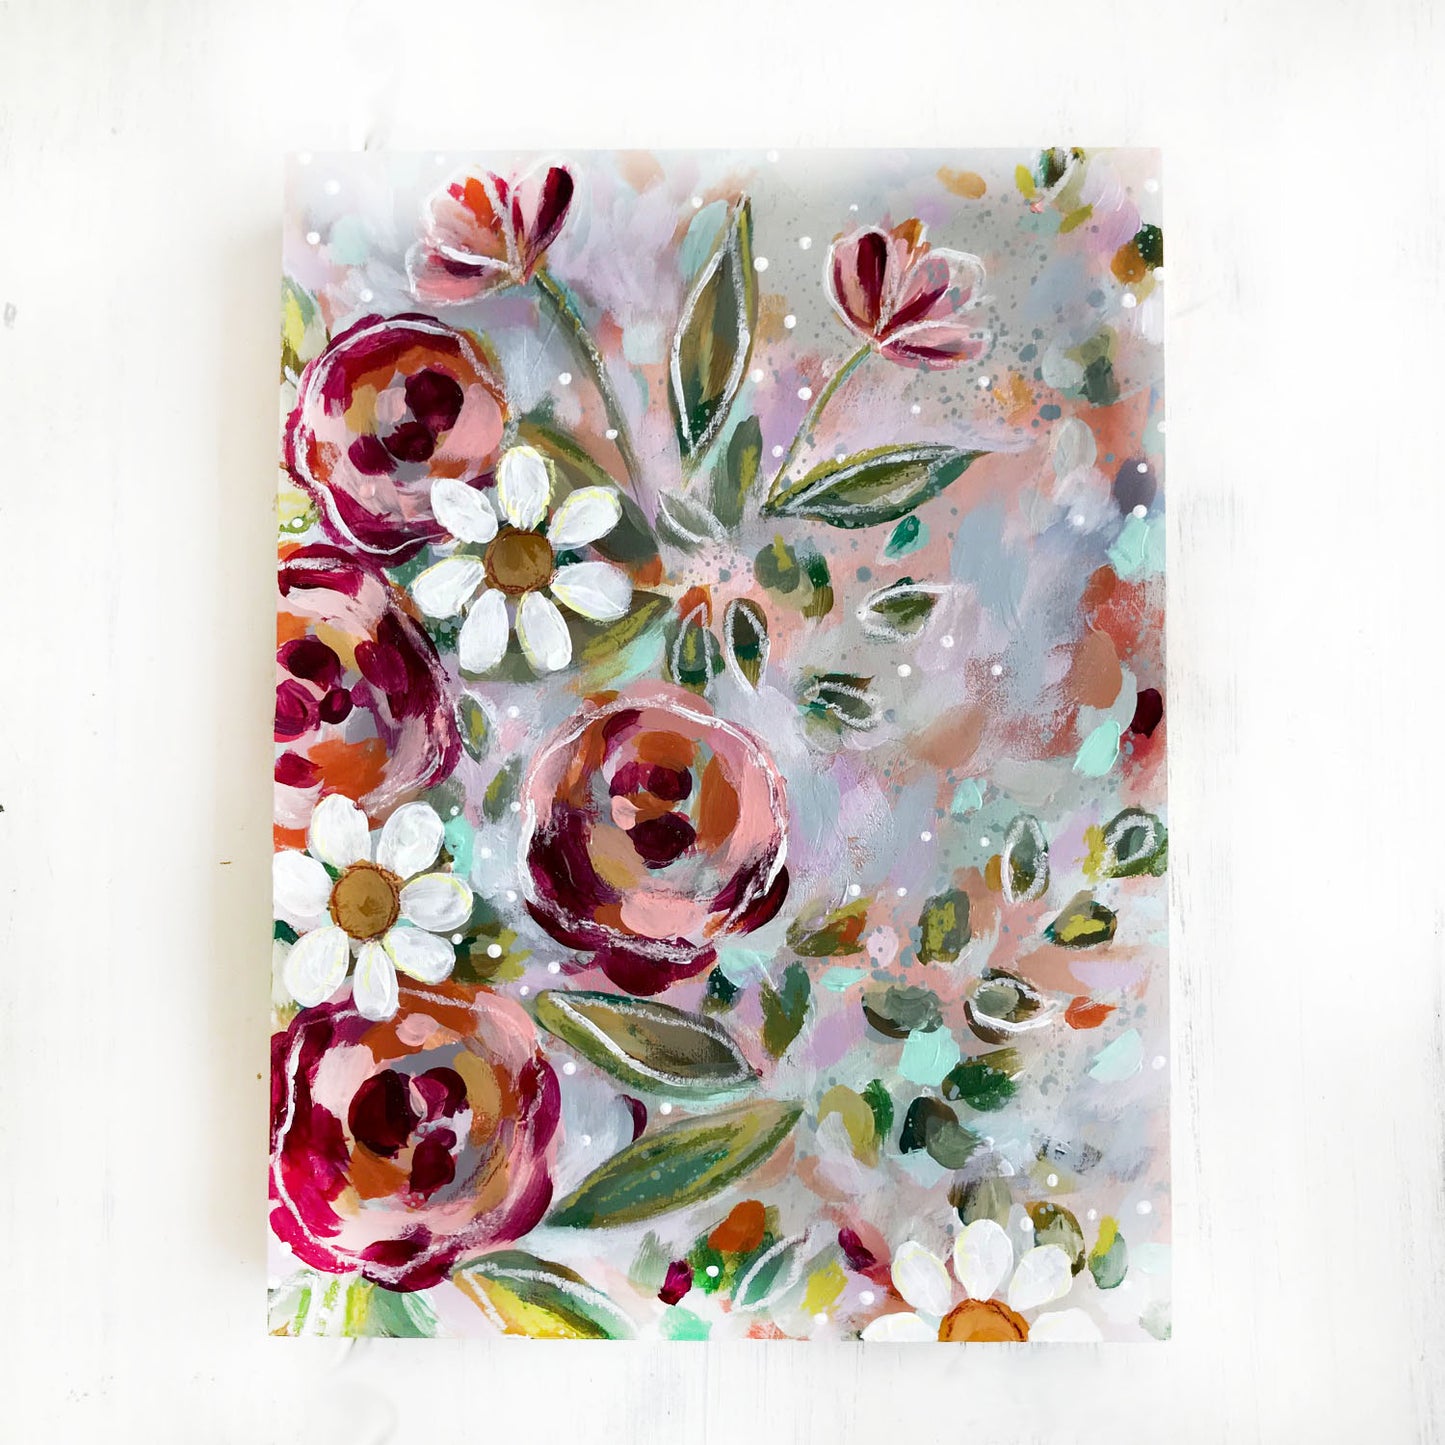 New Spring Floral Mixed Media Painting on 9x12 inch wood panel - Bethany Joy Art